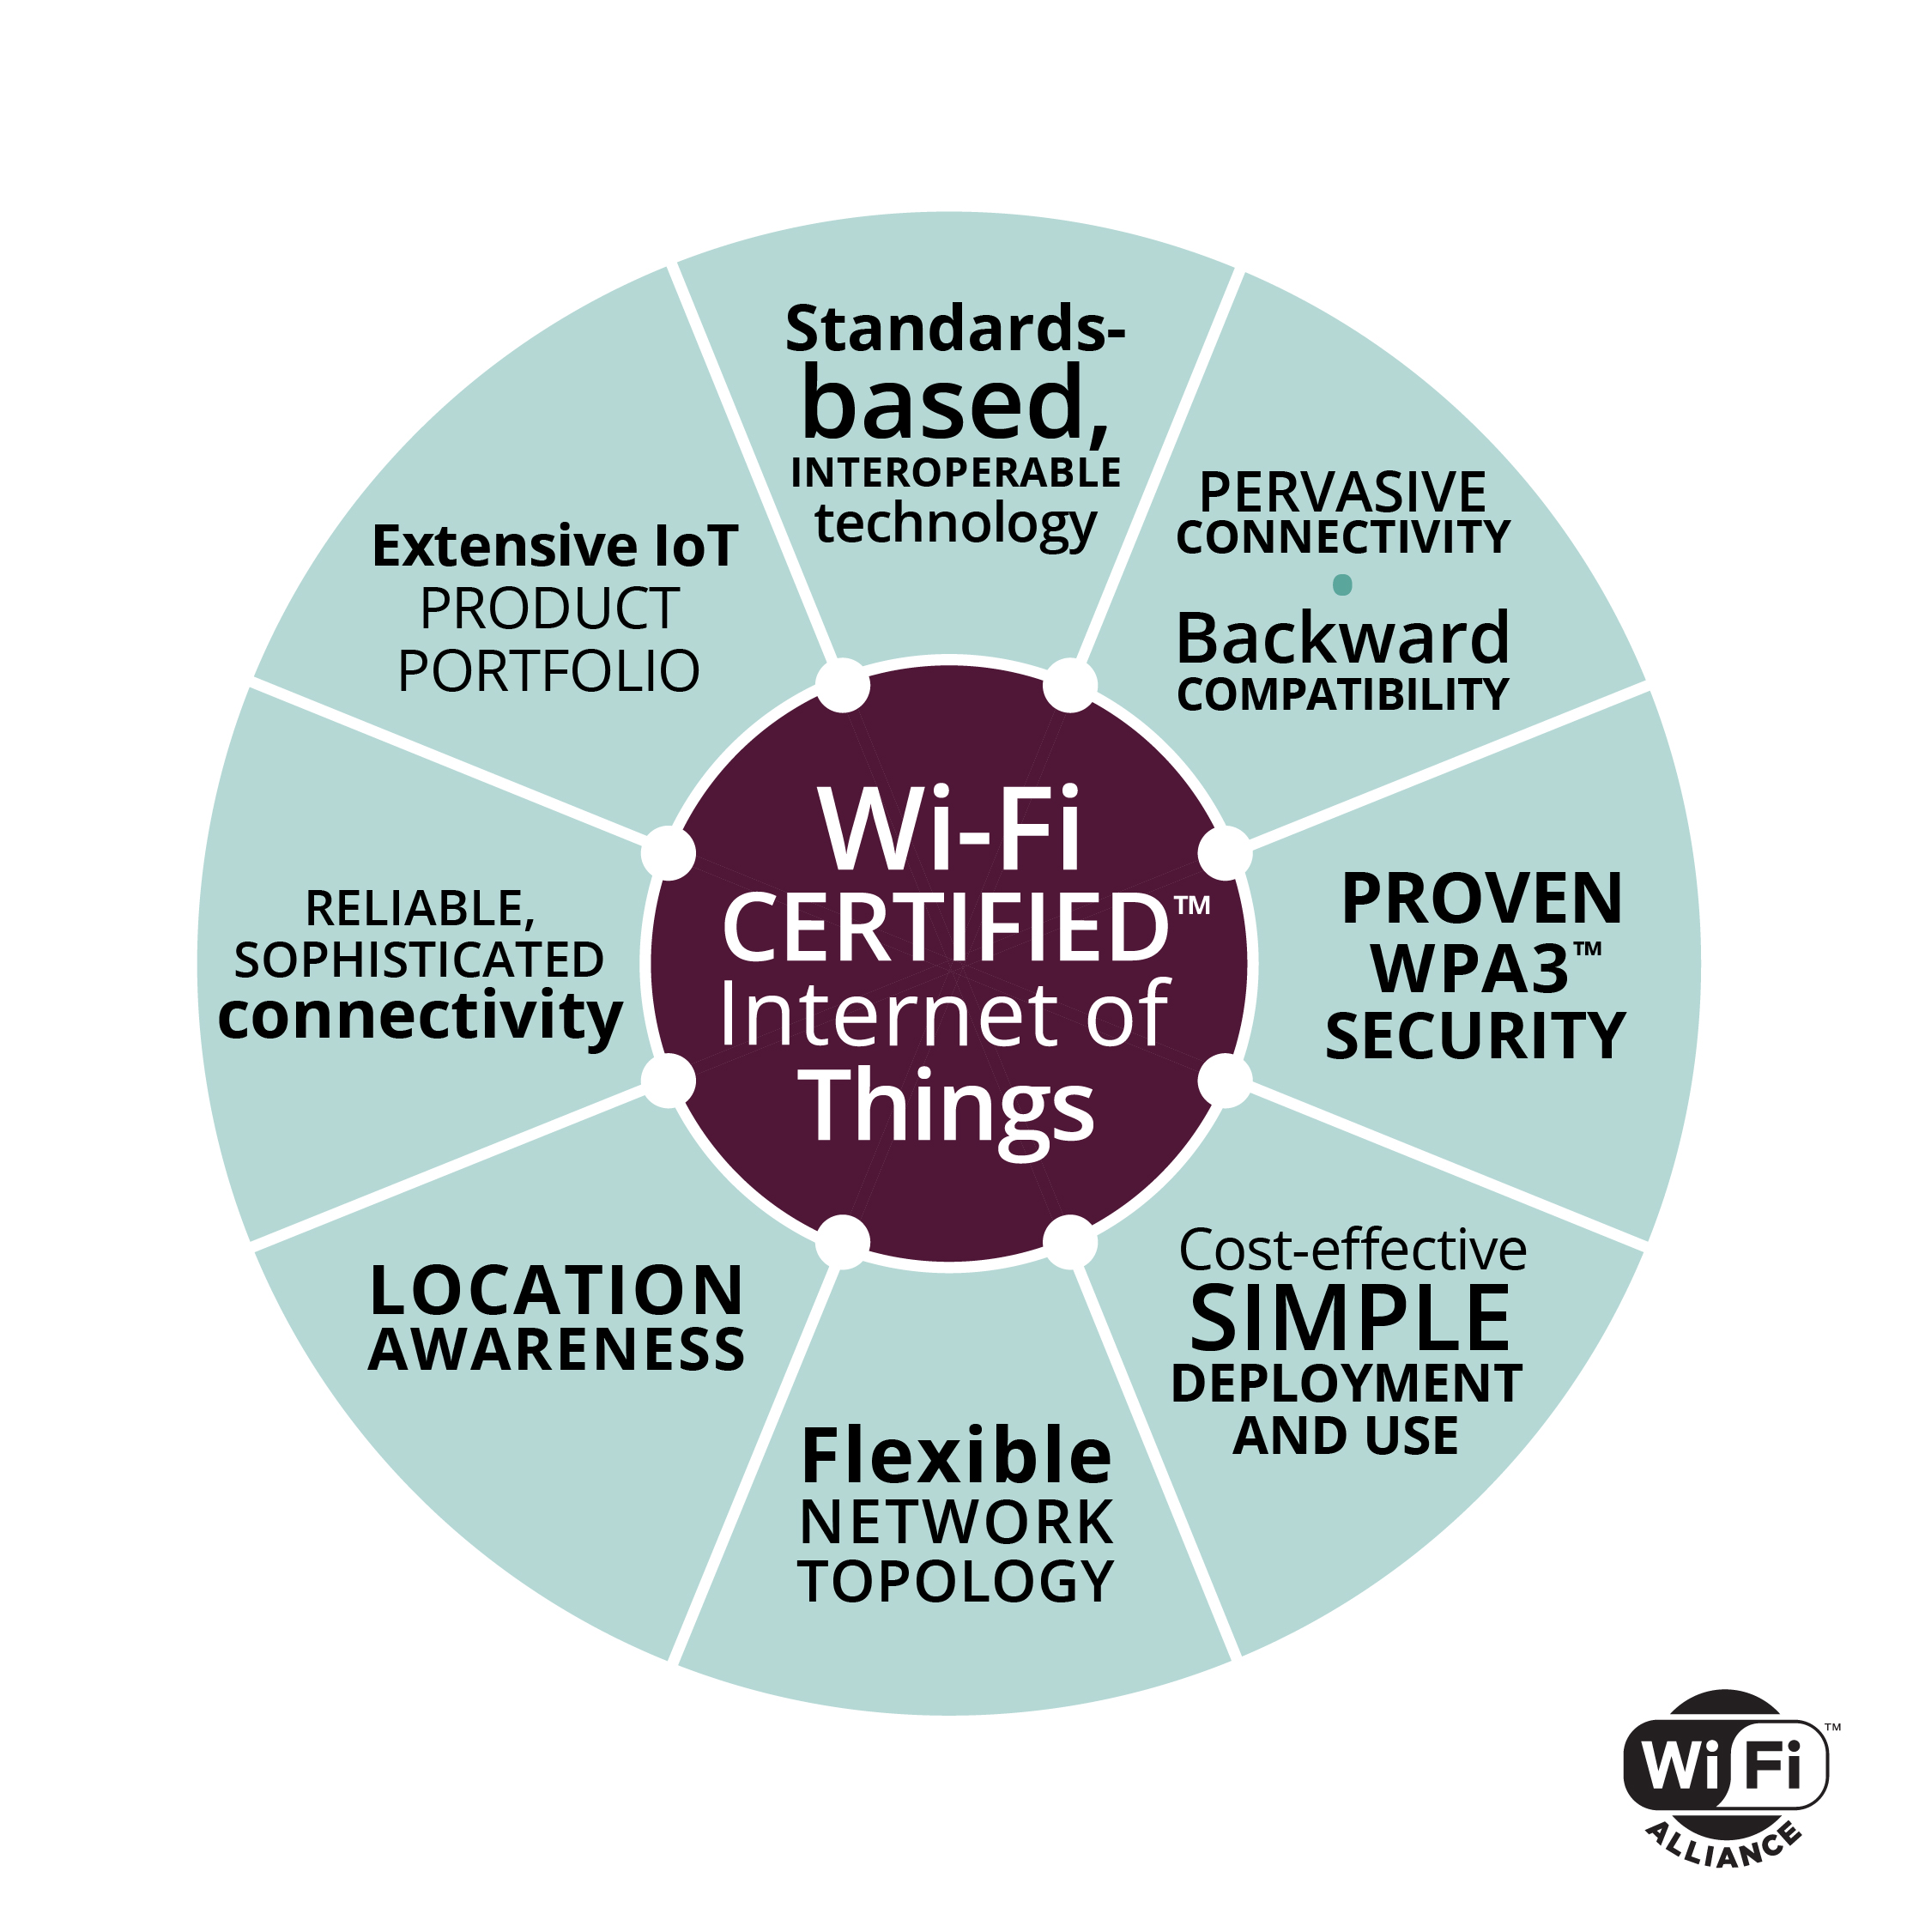 New WiFi 6E and WiFi 7 standards: market and applications - IoT Business  News